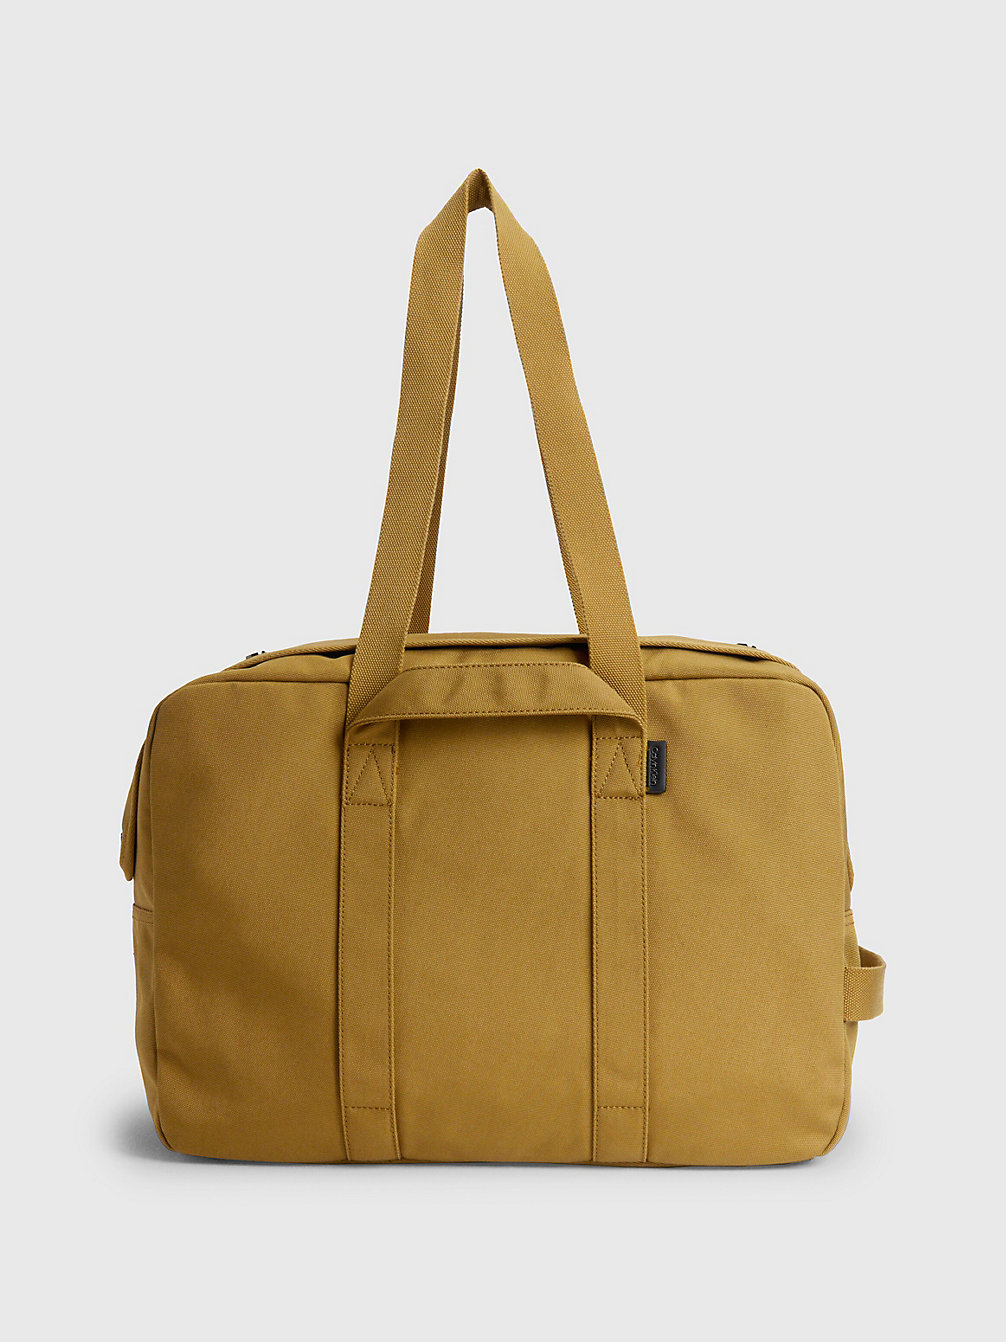 DULL GOLD Recycled Weekend Bag undefined men Calvin Klein